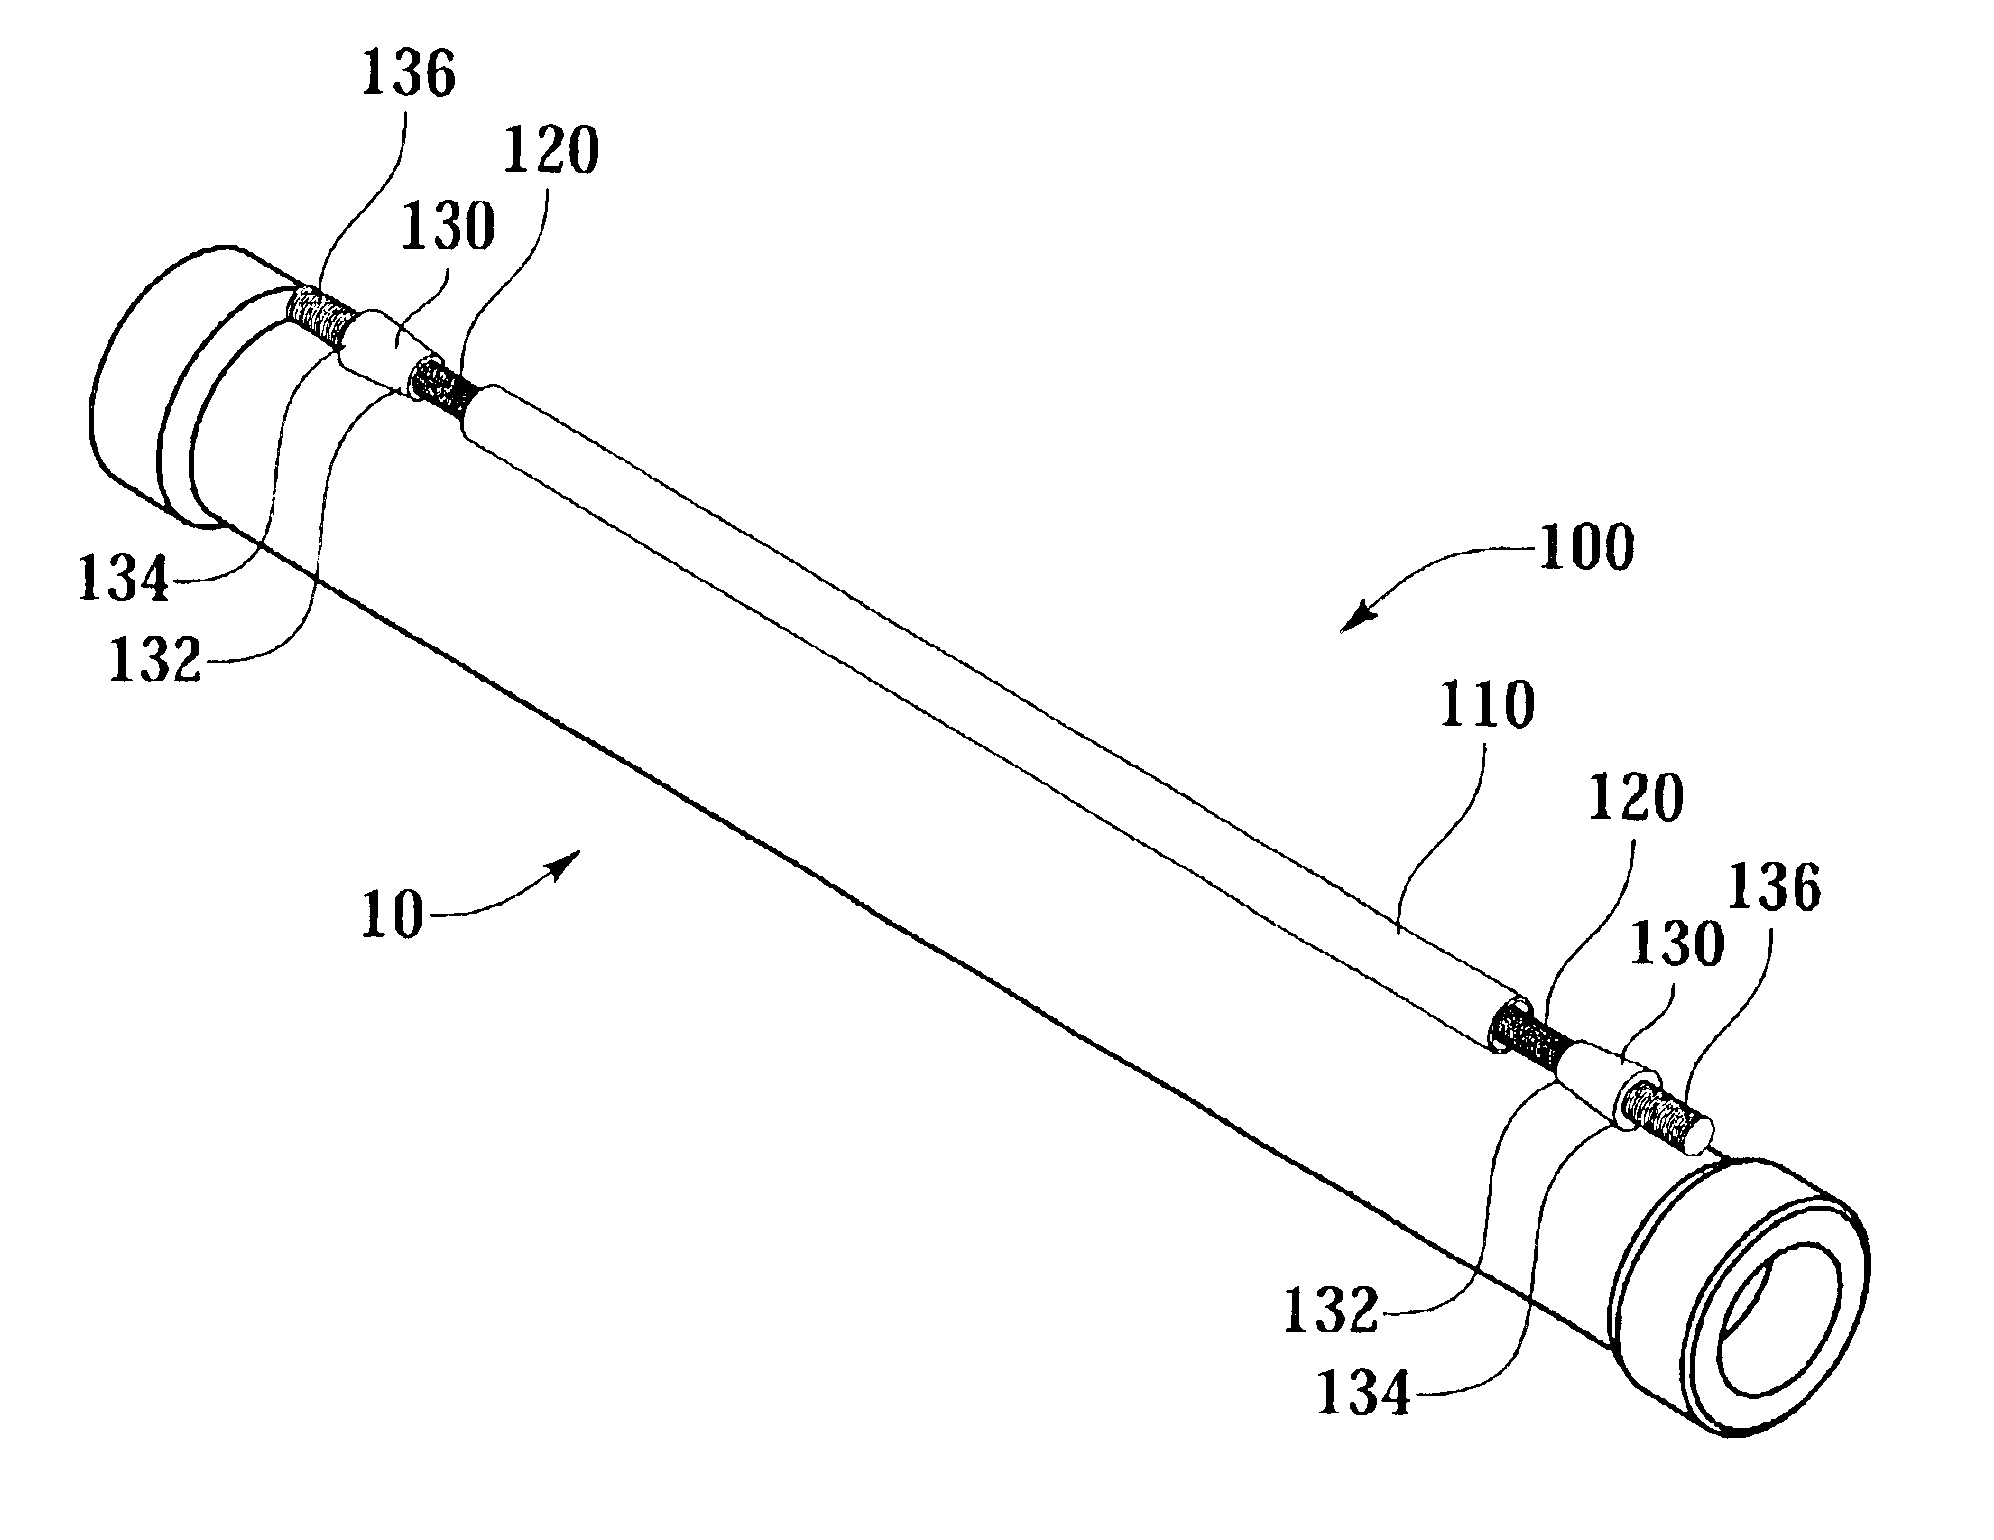 Piping with integral force absorbing restraining system